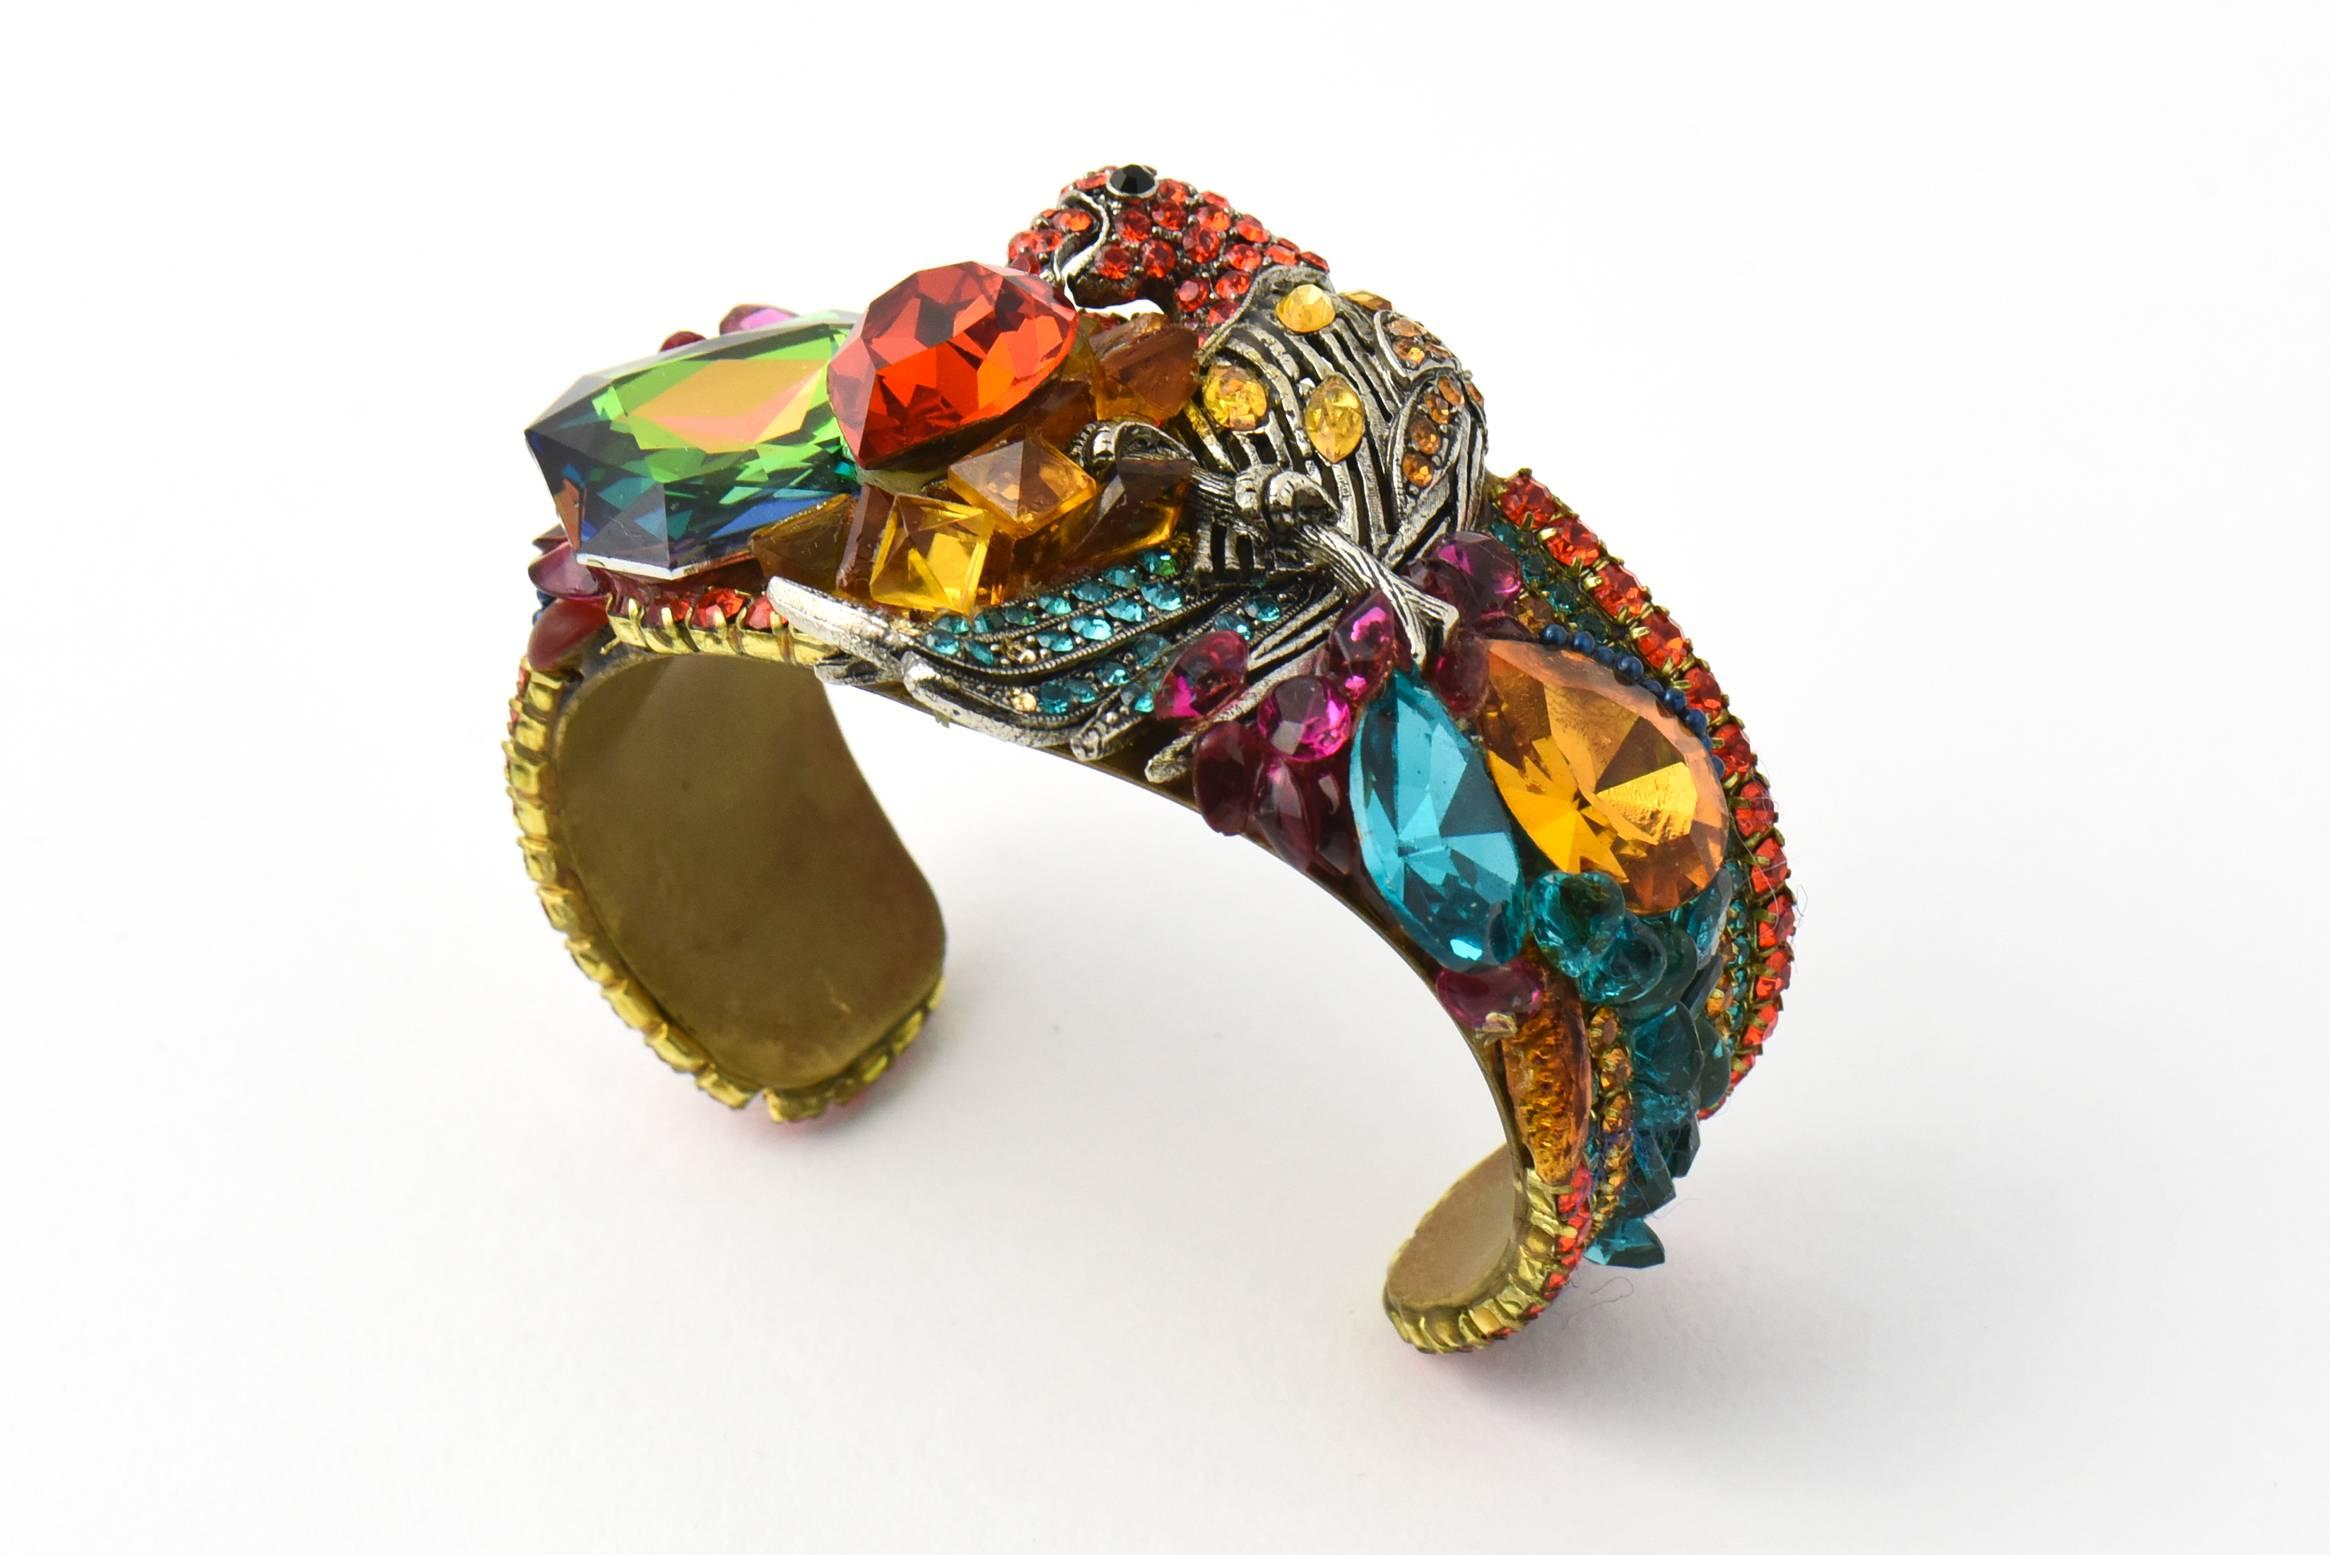 Impressive Wendy Gell Cuff Bracelet handmade by Gell in 1981.  This bold, colorful, and gorgeous bracelet features a parrot, paved with colorful Swarovski stones, accented with larger and smaller rhinestone which include a red heart and a large